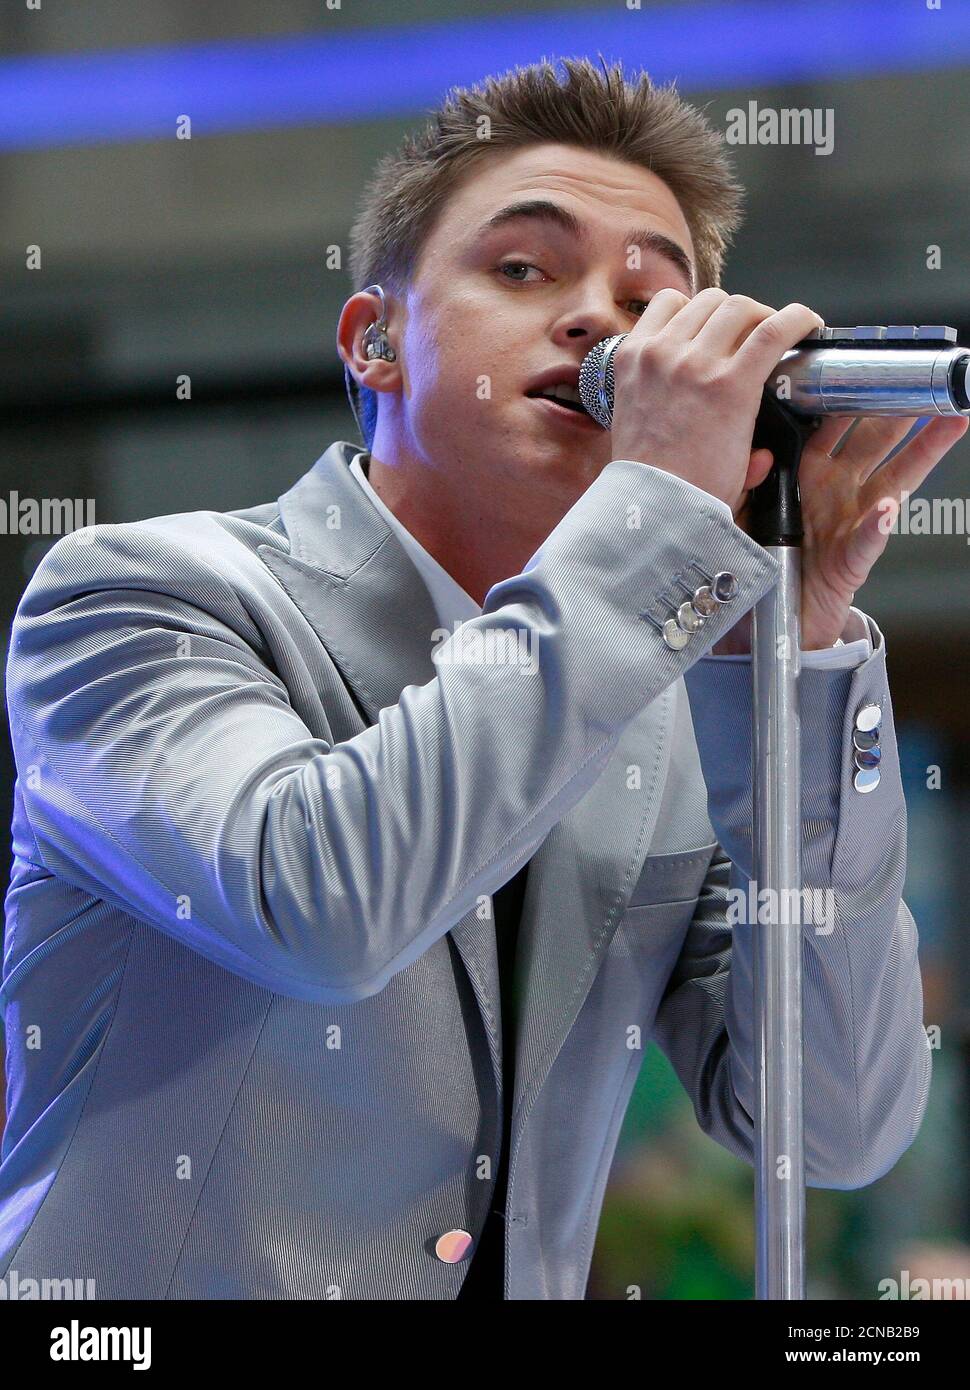 Singer Jesse McCartney performs on NBC's 'Today' show in New York August 29, 2008.     REUTERS/Brendan McDermid (UNITED STATES) Stock Photo